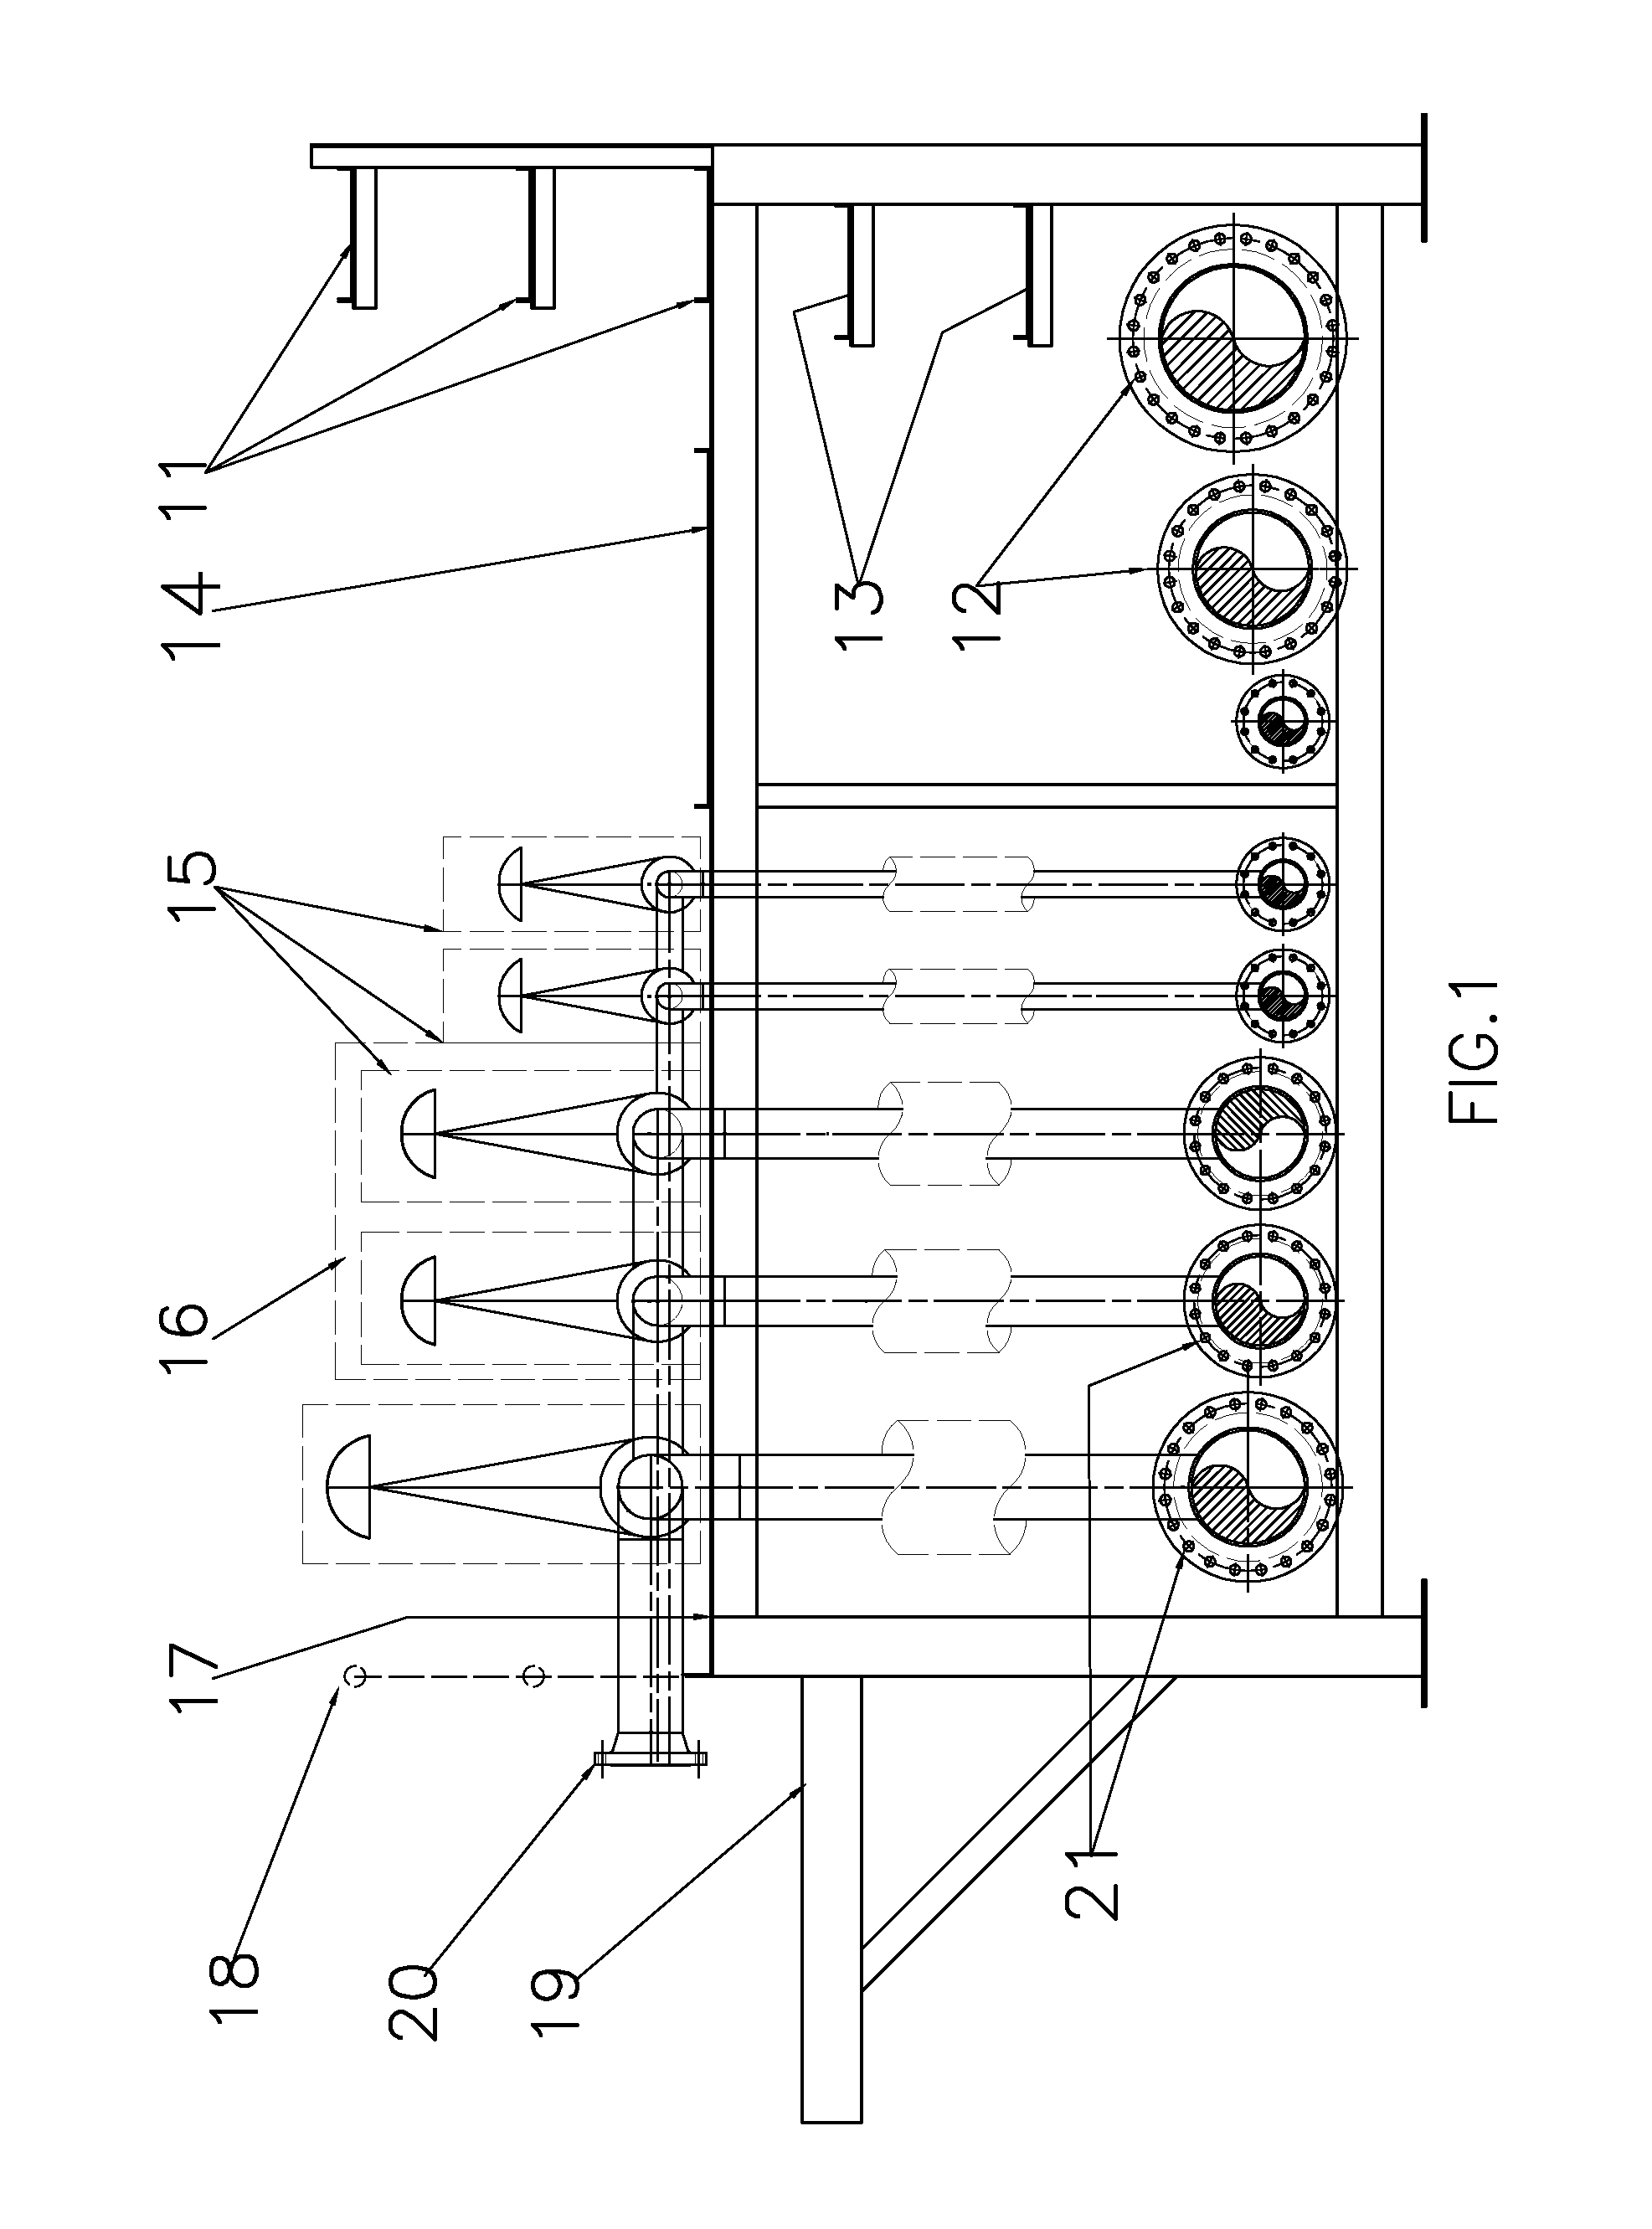 System and method for steam-assisted gravity drainage (SAGD)-based heavy oil well production